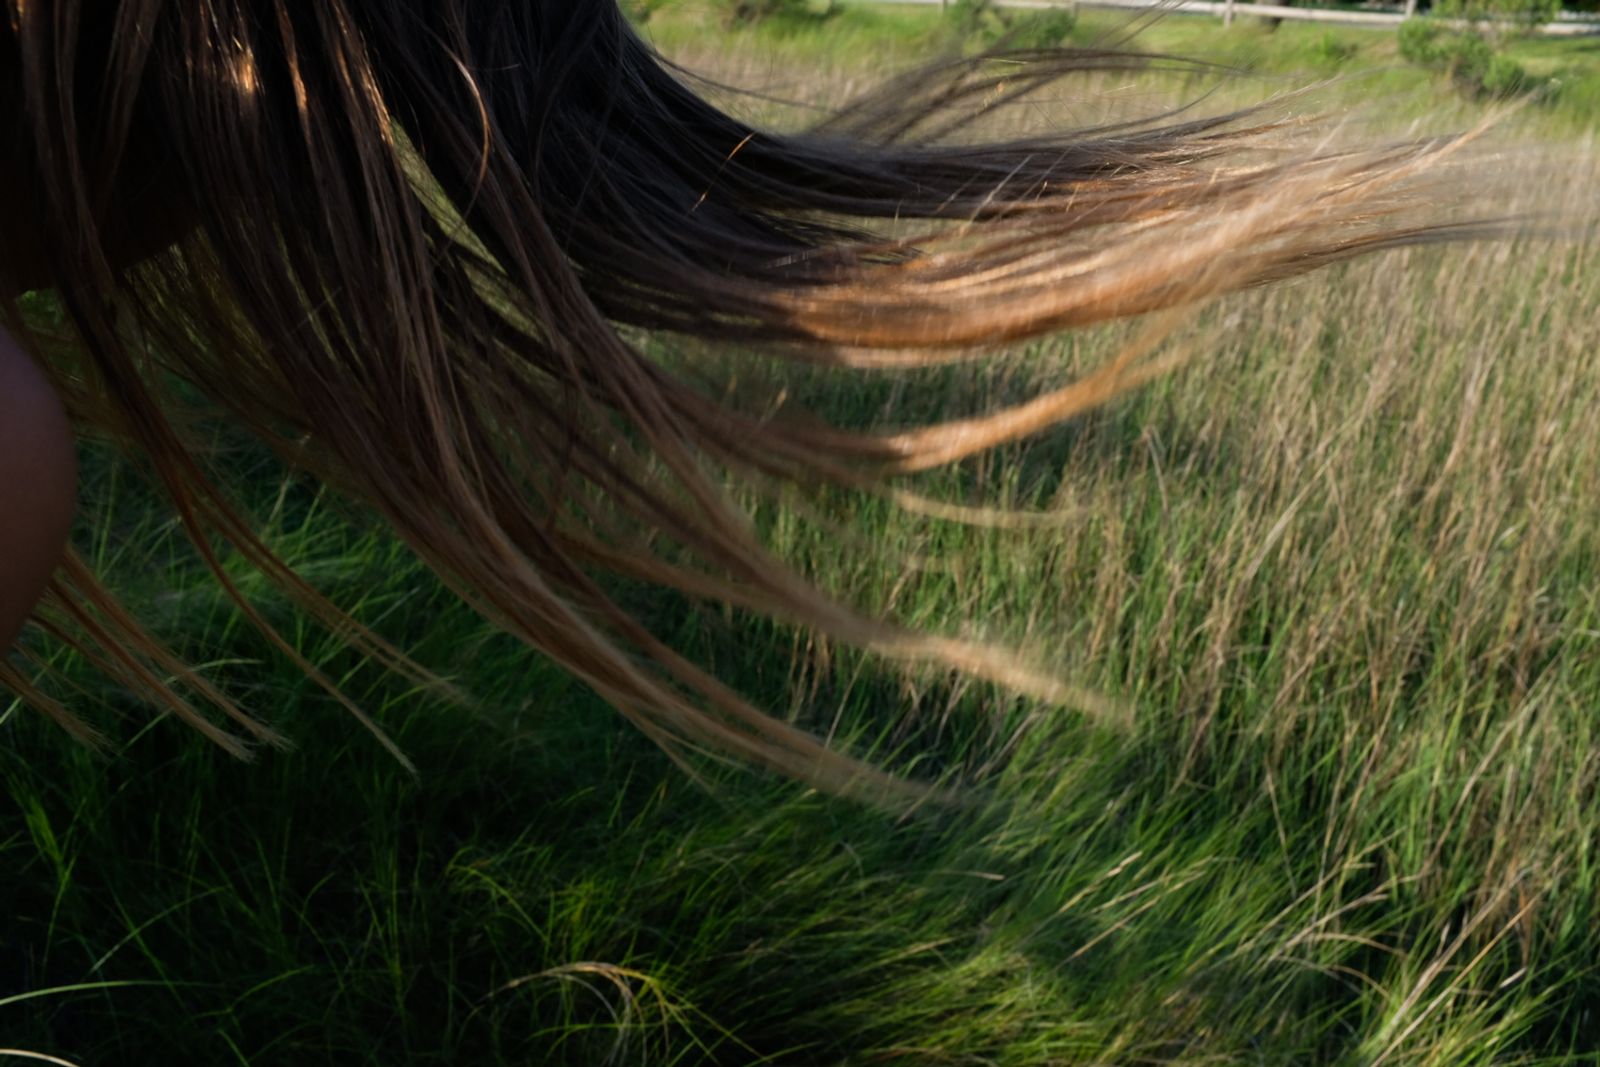 © Angela Ramsey - Rose's hair blows in the wind.